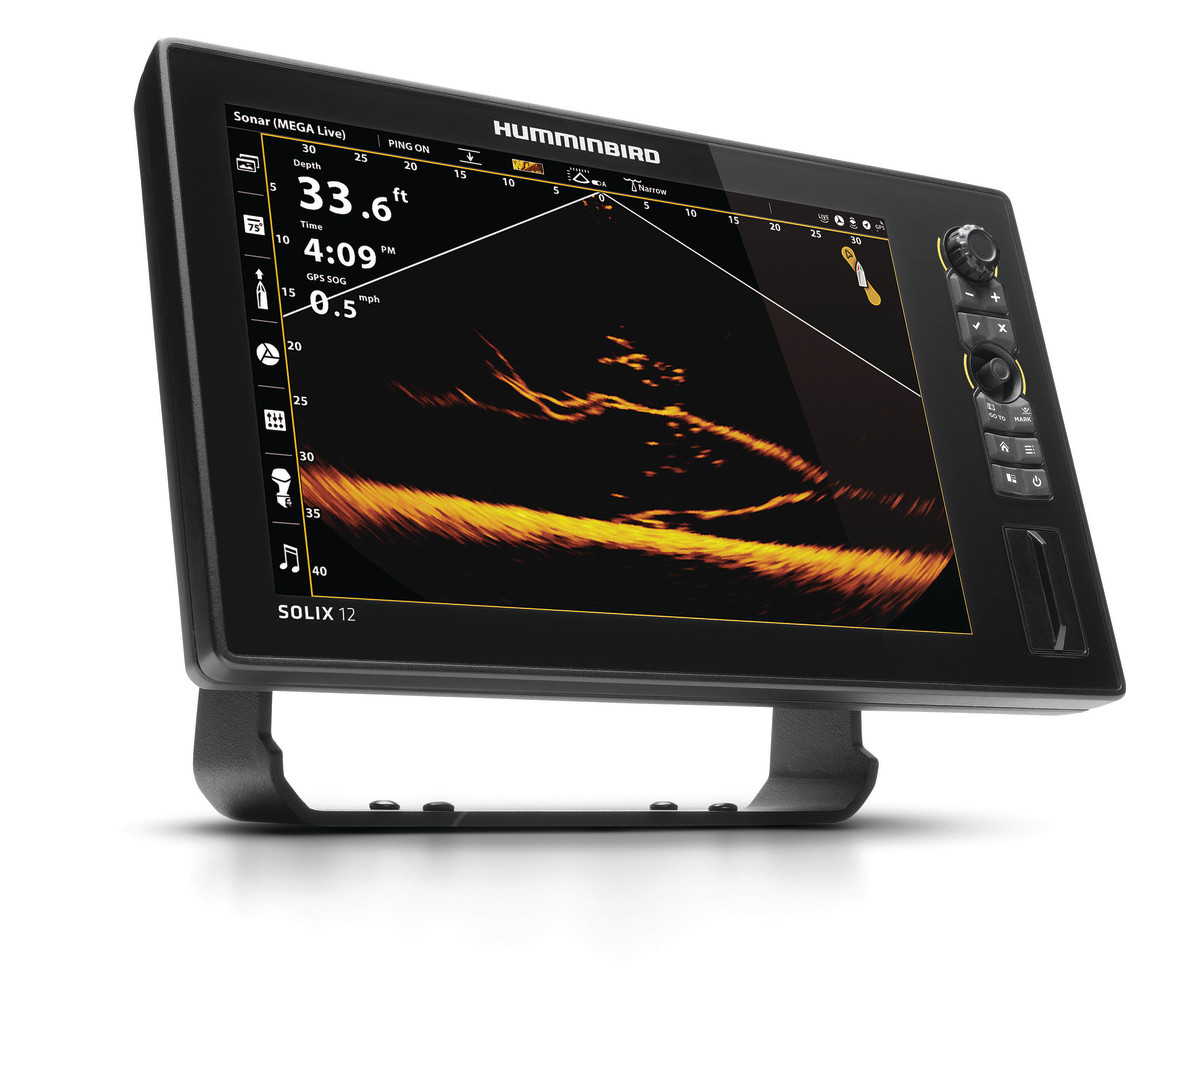 Humminbird received Best of Electronics honors at ICAST 2021 for its MEGA Live Imaging sonar technology.